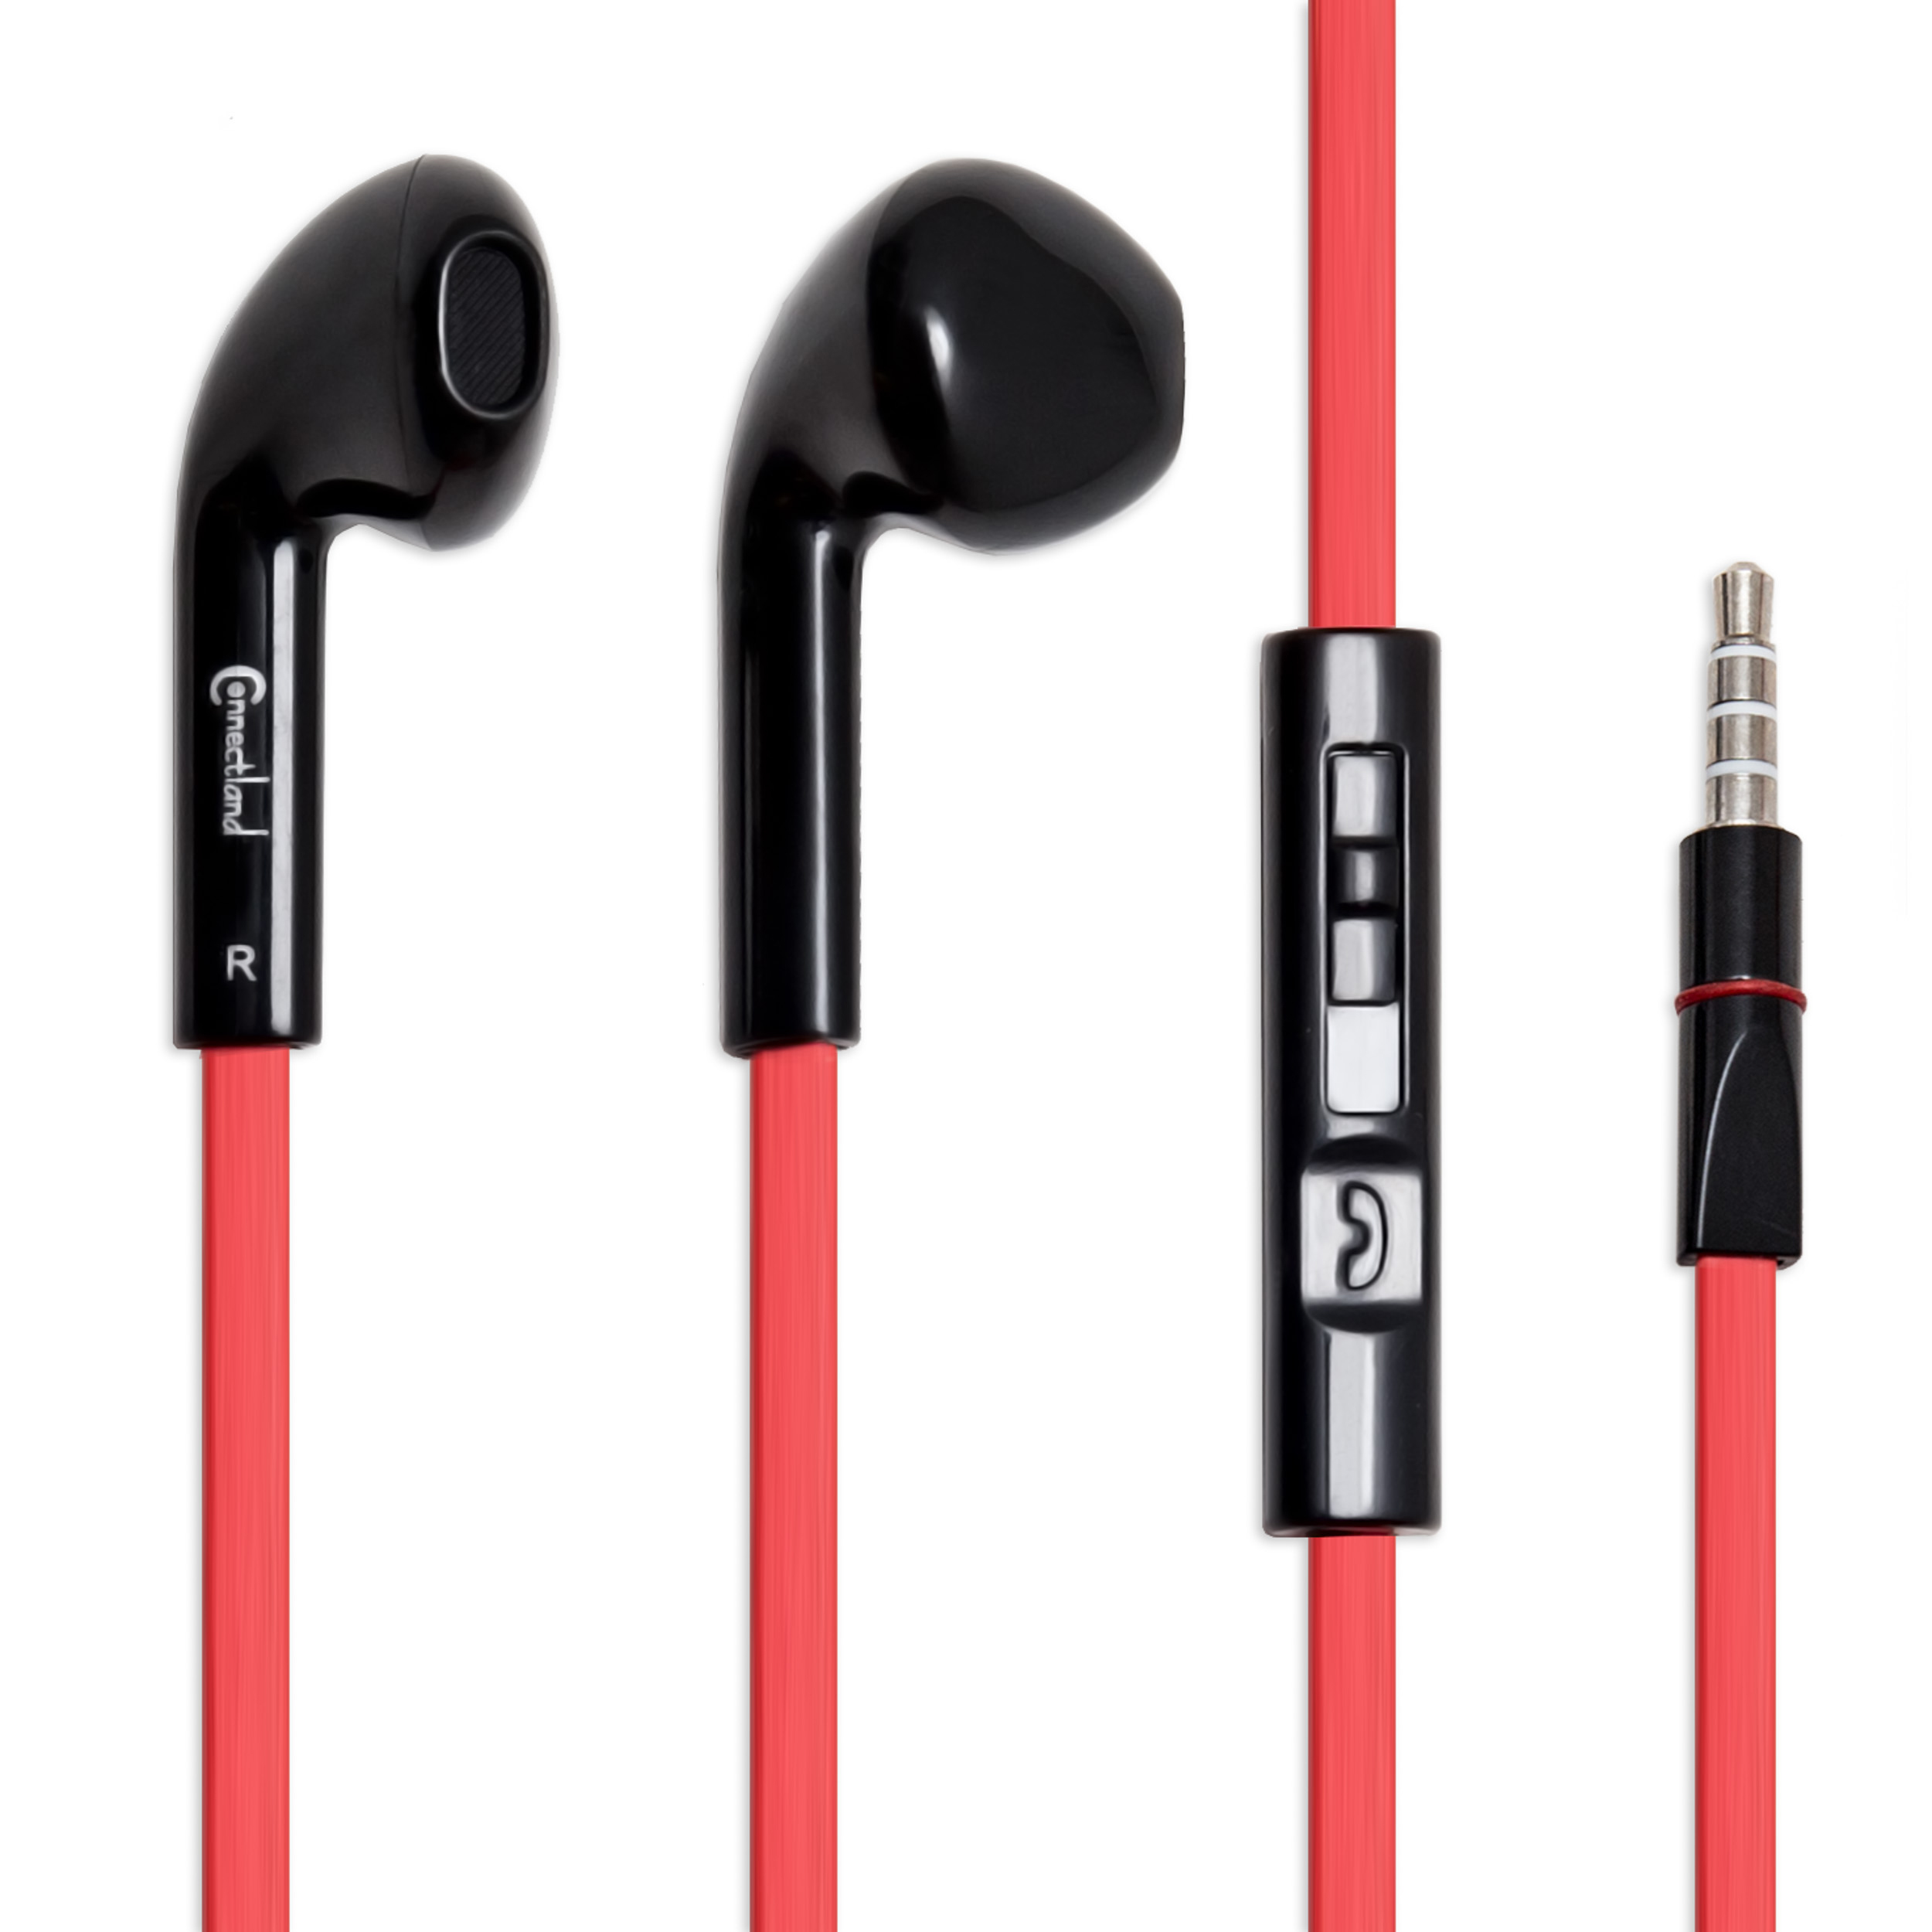 SYBA Multimedia Connectland In-Ear Earphone with In-Line Microphone, and Call Control- Red/Black - image 2 of 2